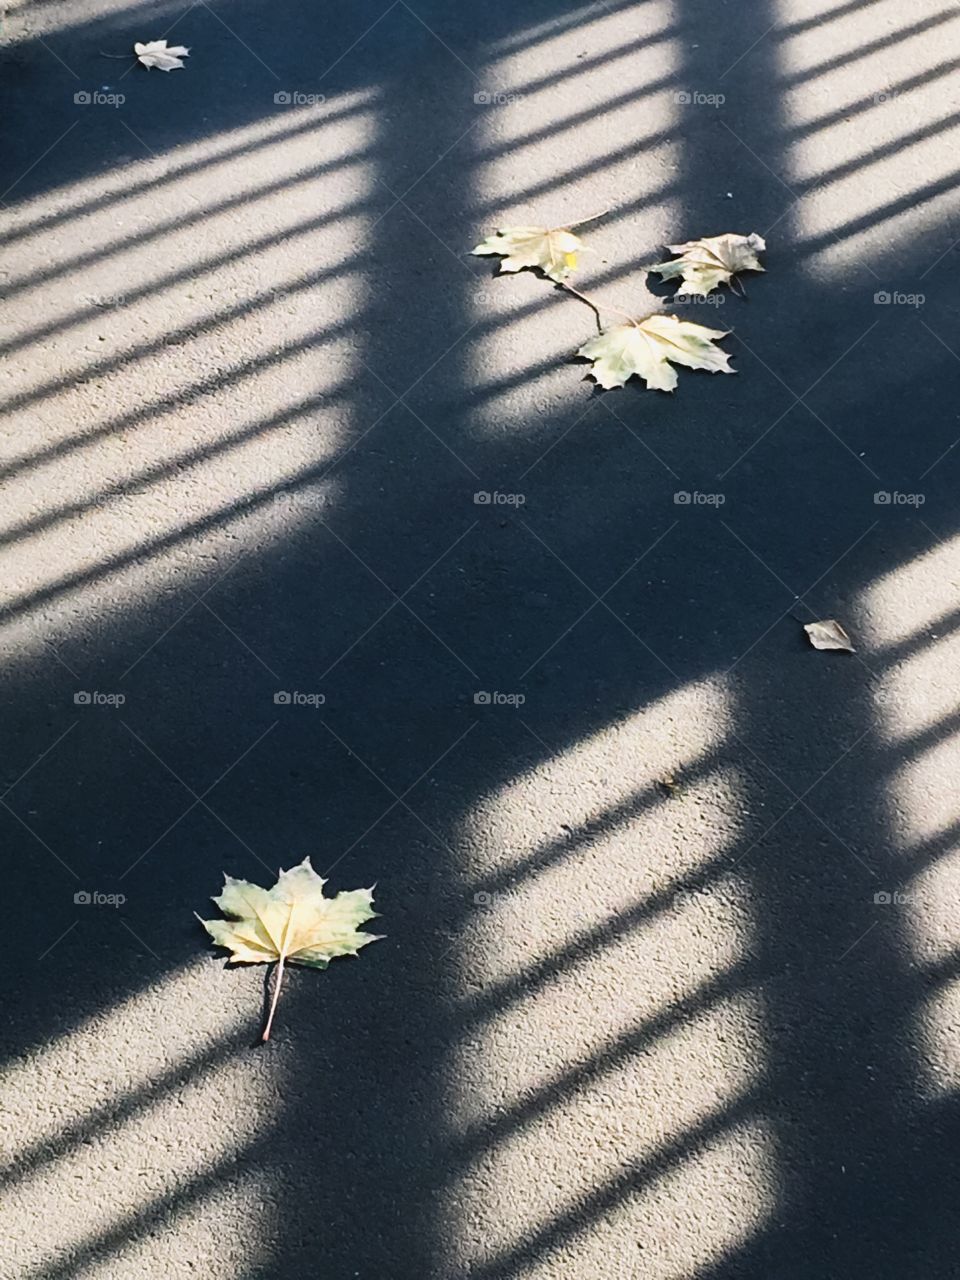 Autumn. Shadows on asphalt. Leaves fall. Rule of thirds. Geometry in the city